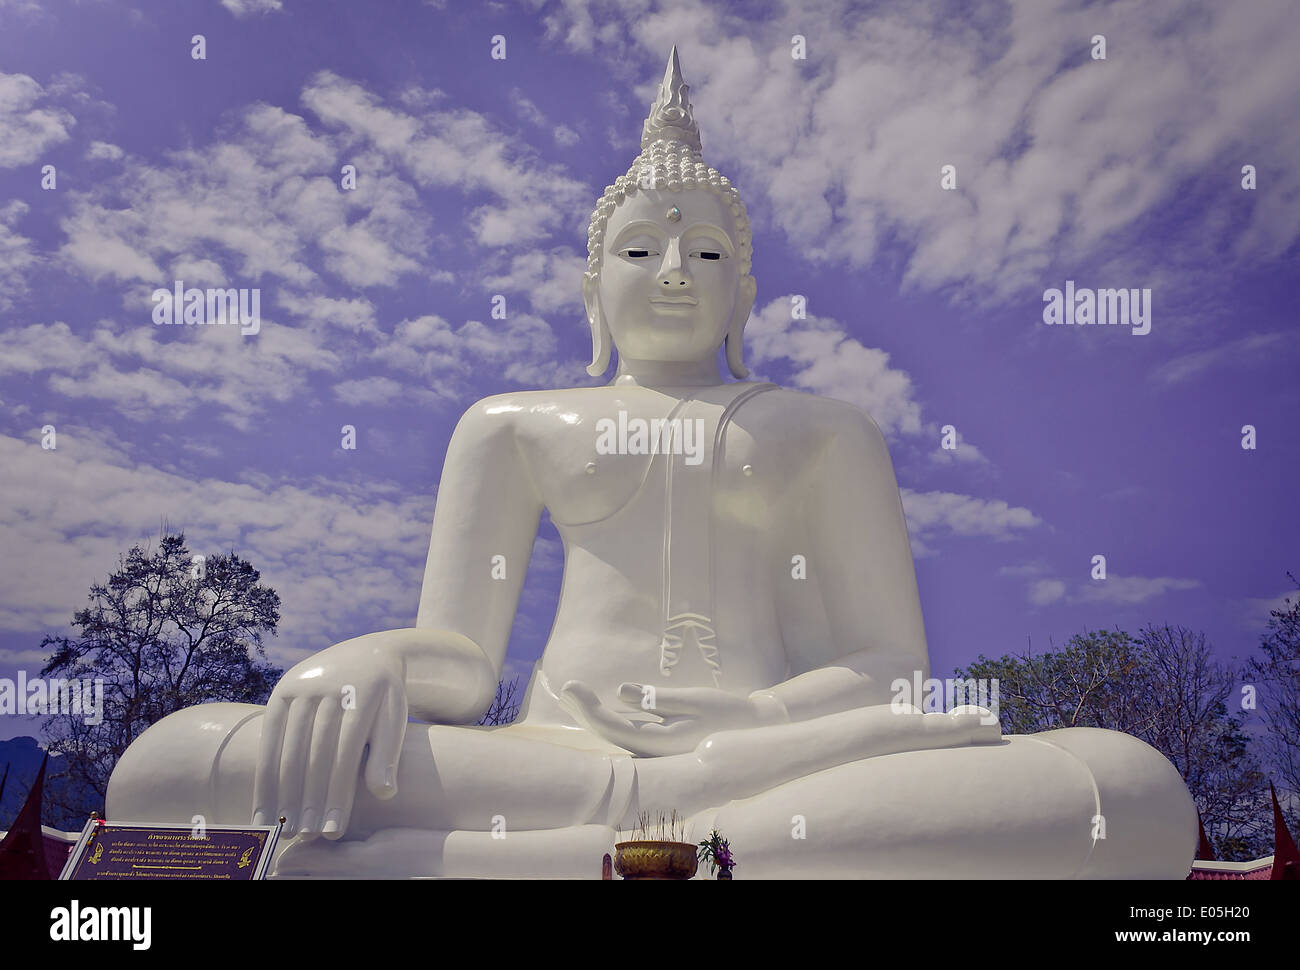 White Seated Buddha Image with Cloudy Blue Sky Background Stock Photo